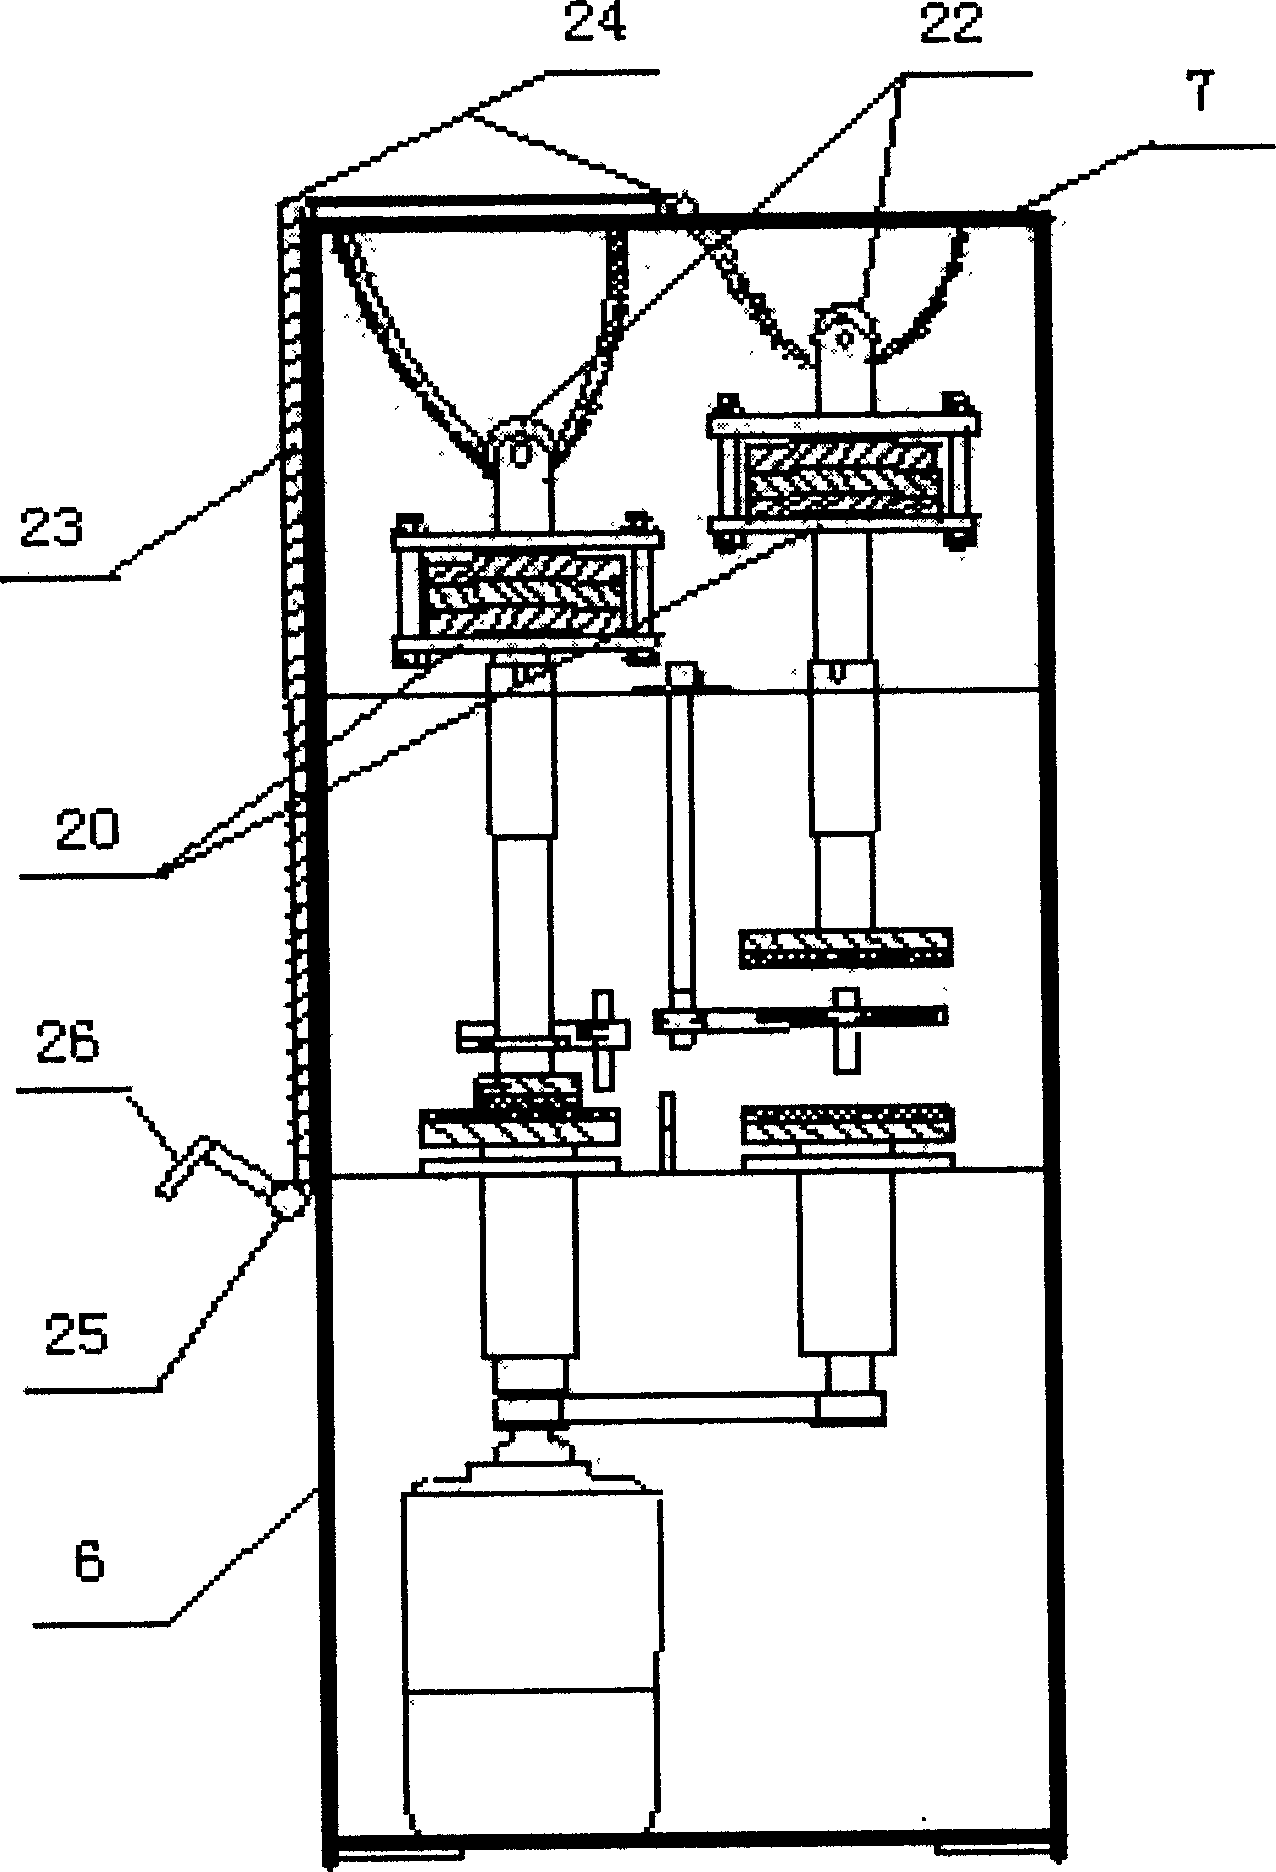 Multiple factor combination effect analog experiment apparatus for static electricity dynamic potentials